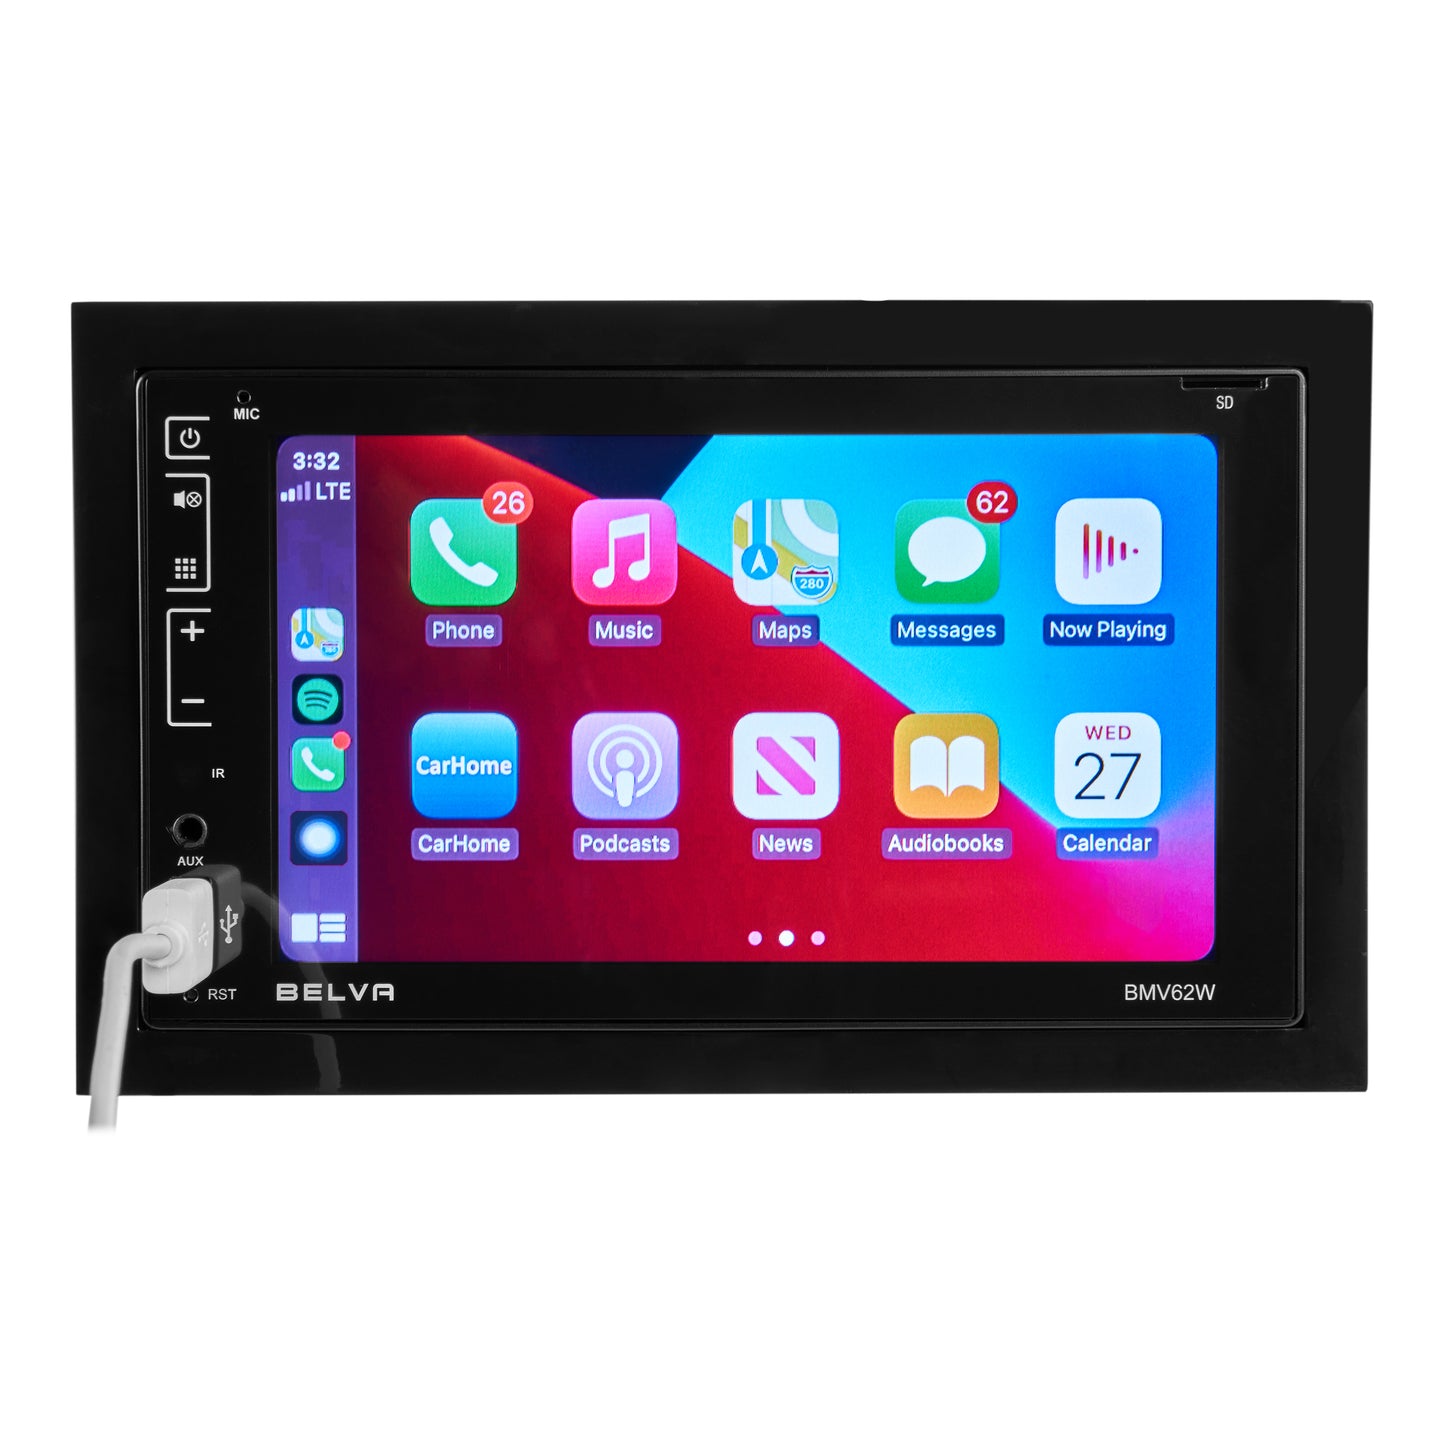 BMV62W | 6.2" Double DIN Touchscreen Bluetooth Car Stereo Receiver with Apple CarPlay, Android Auto and Phone Mirroring